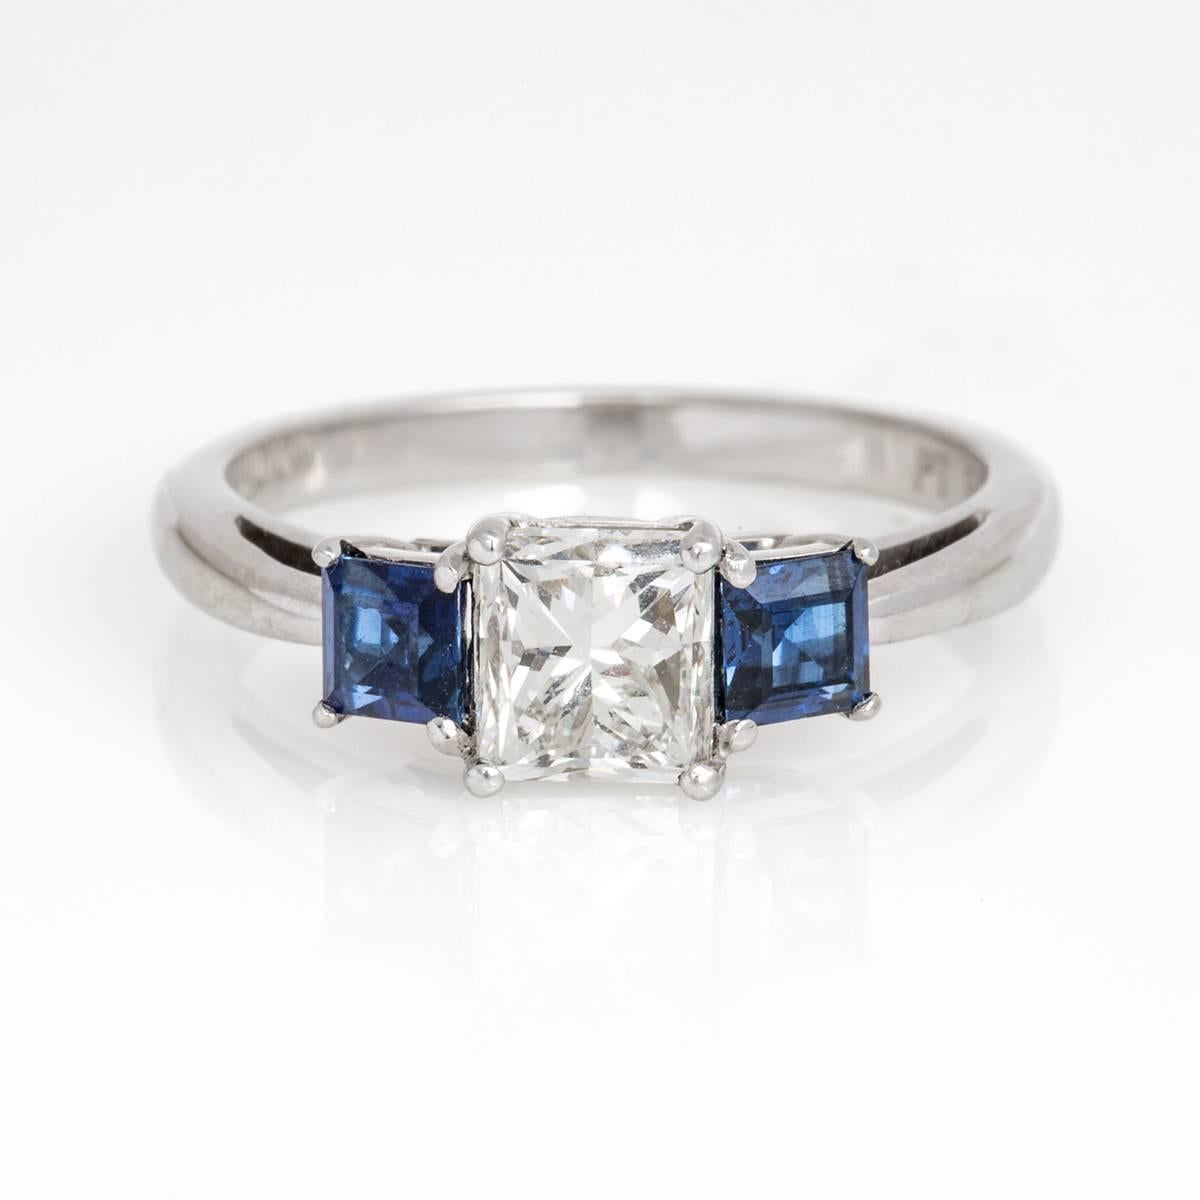 Platinum engagement ring with princess cut diamond weighing a total of 1.00 carat and featuring an F color, SI1 clarity. Two blue sapphires .55 carats total weight. 
GIA Cerified #7116210940. Size 6 